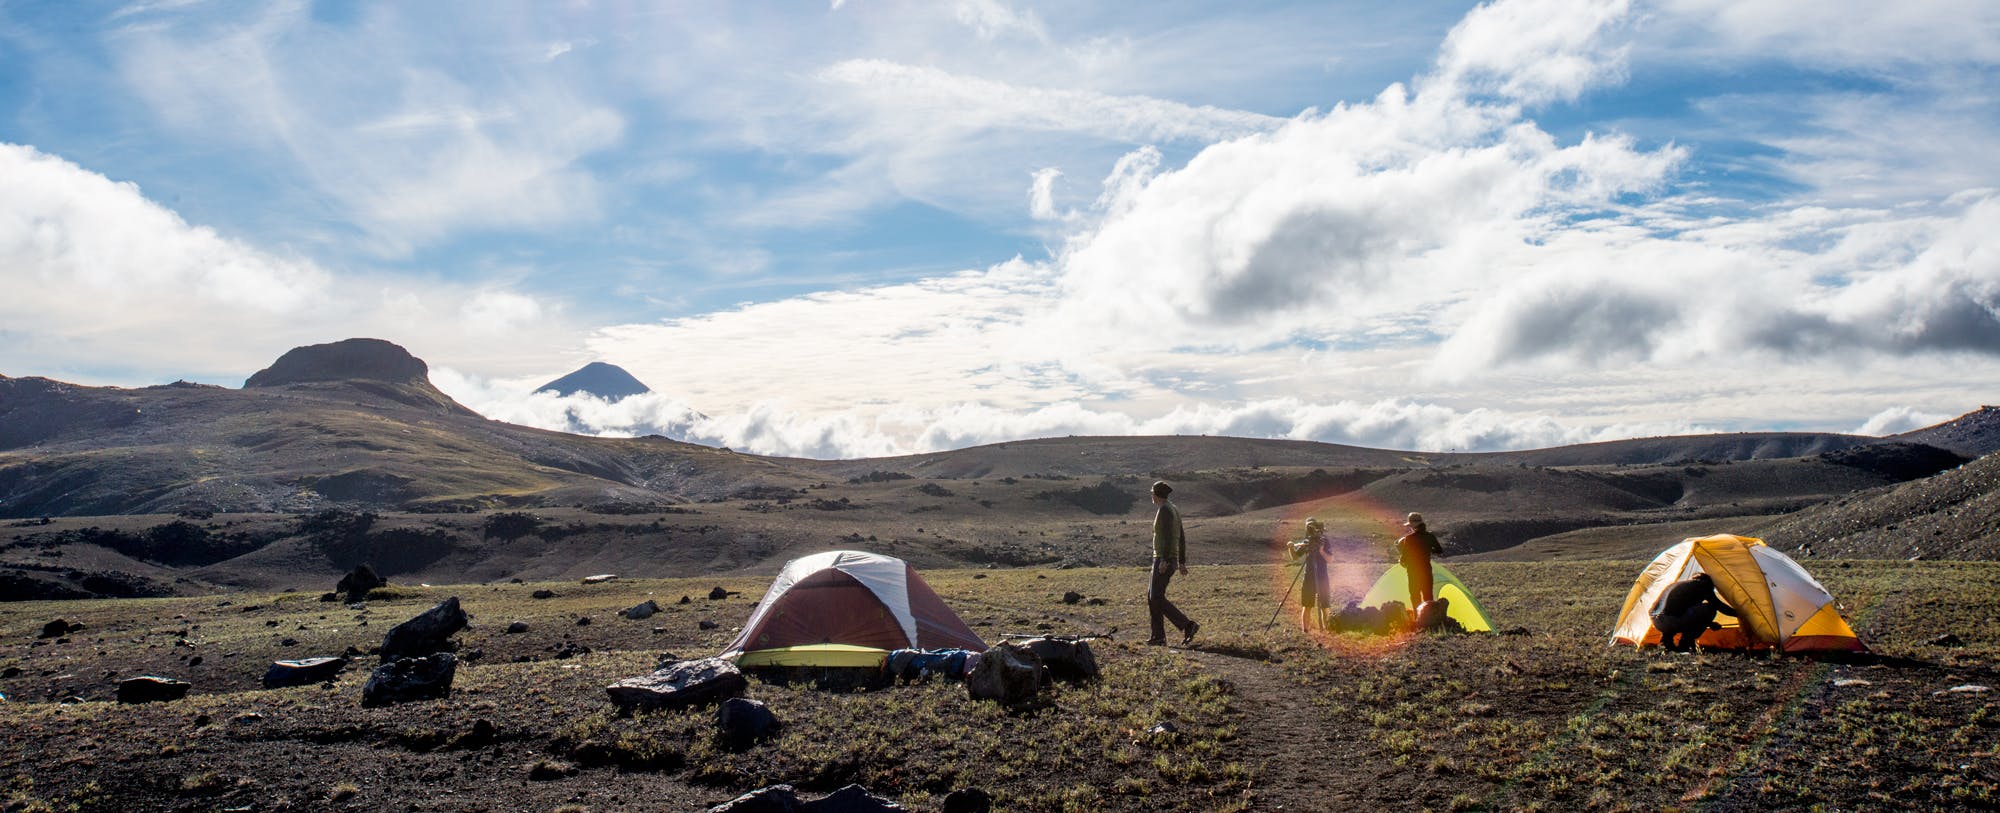 Top Campsite Products: Gather, Cook and Plan Anywhere